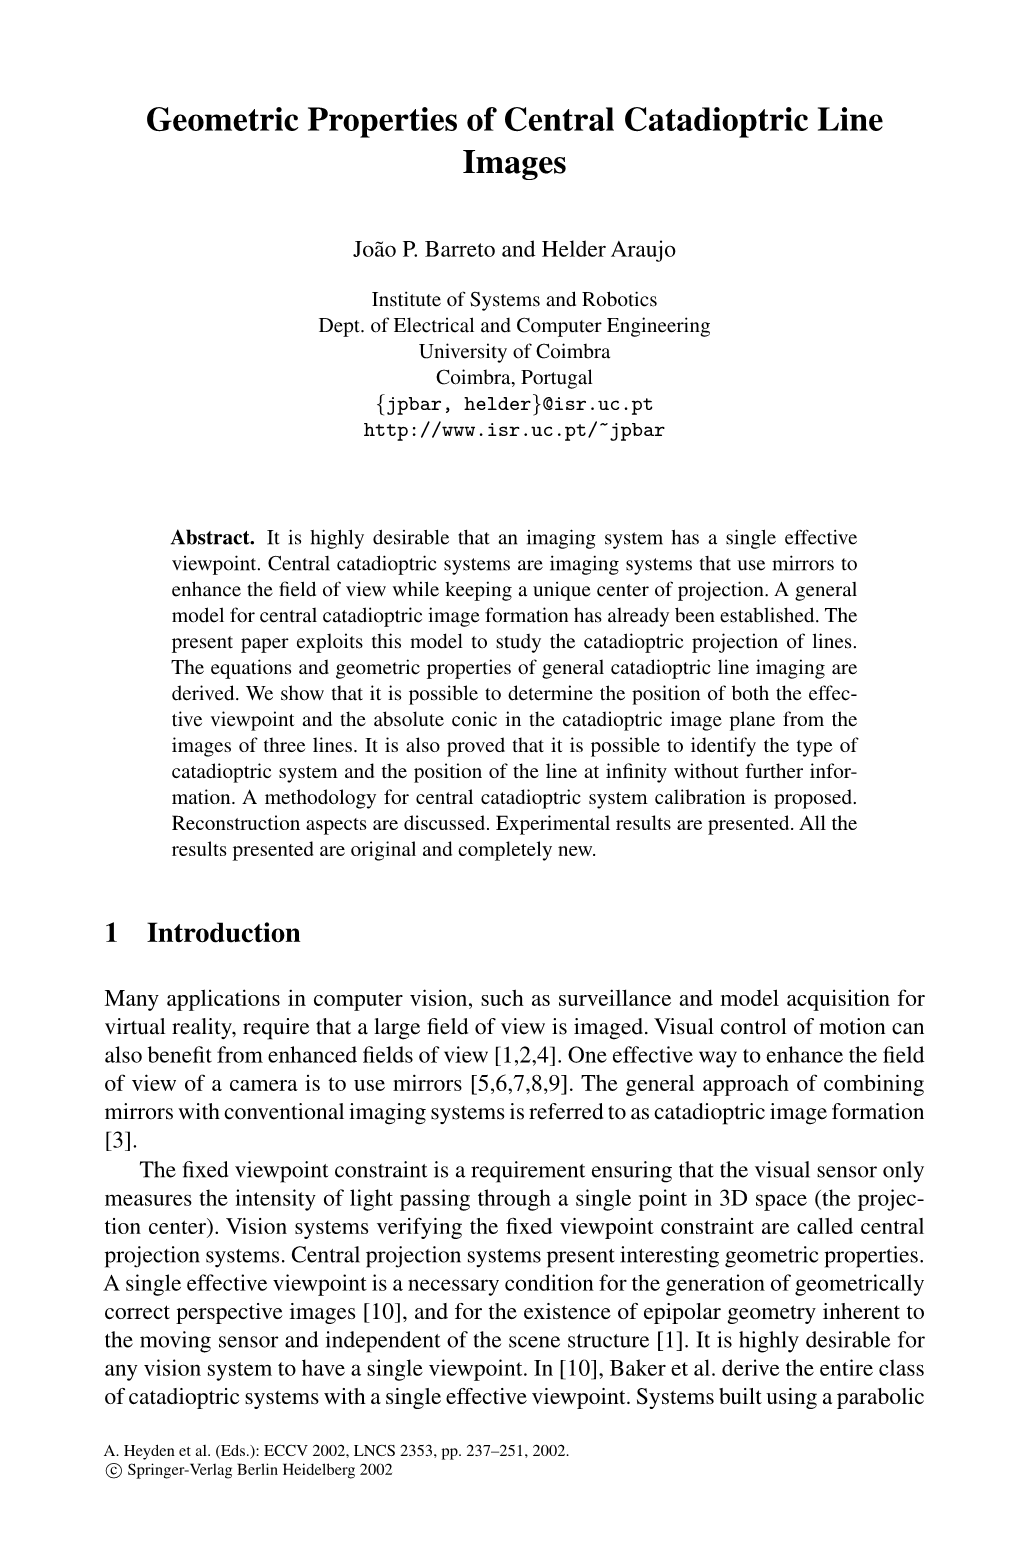 Geometric Properties of Central Catadioptric Line Images